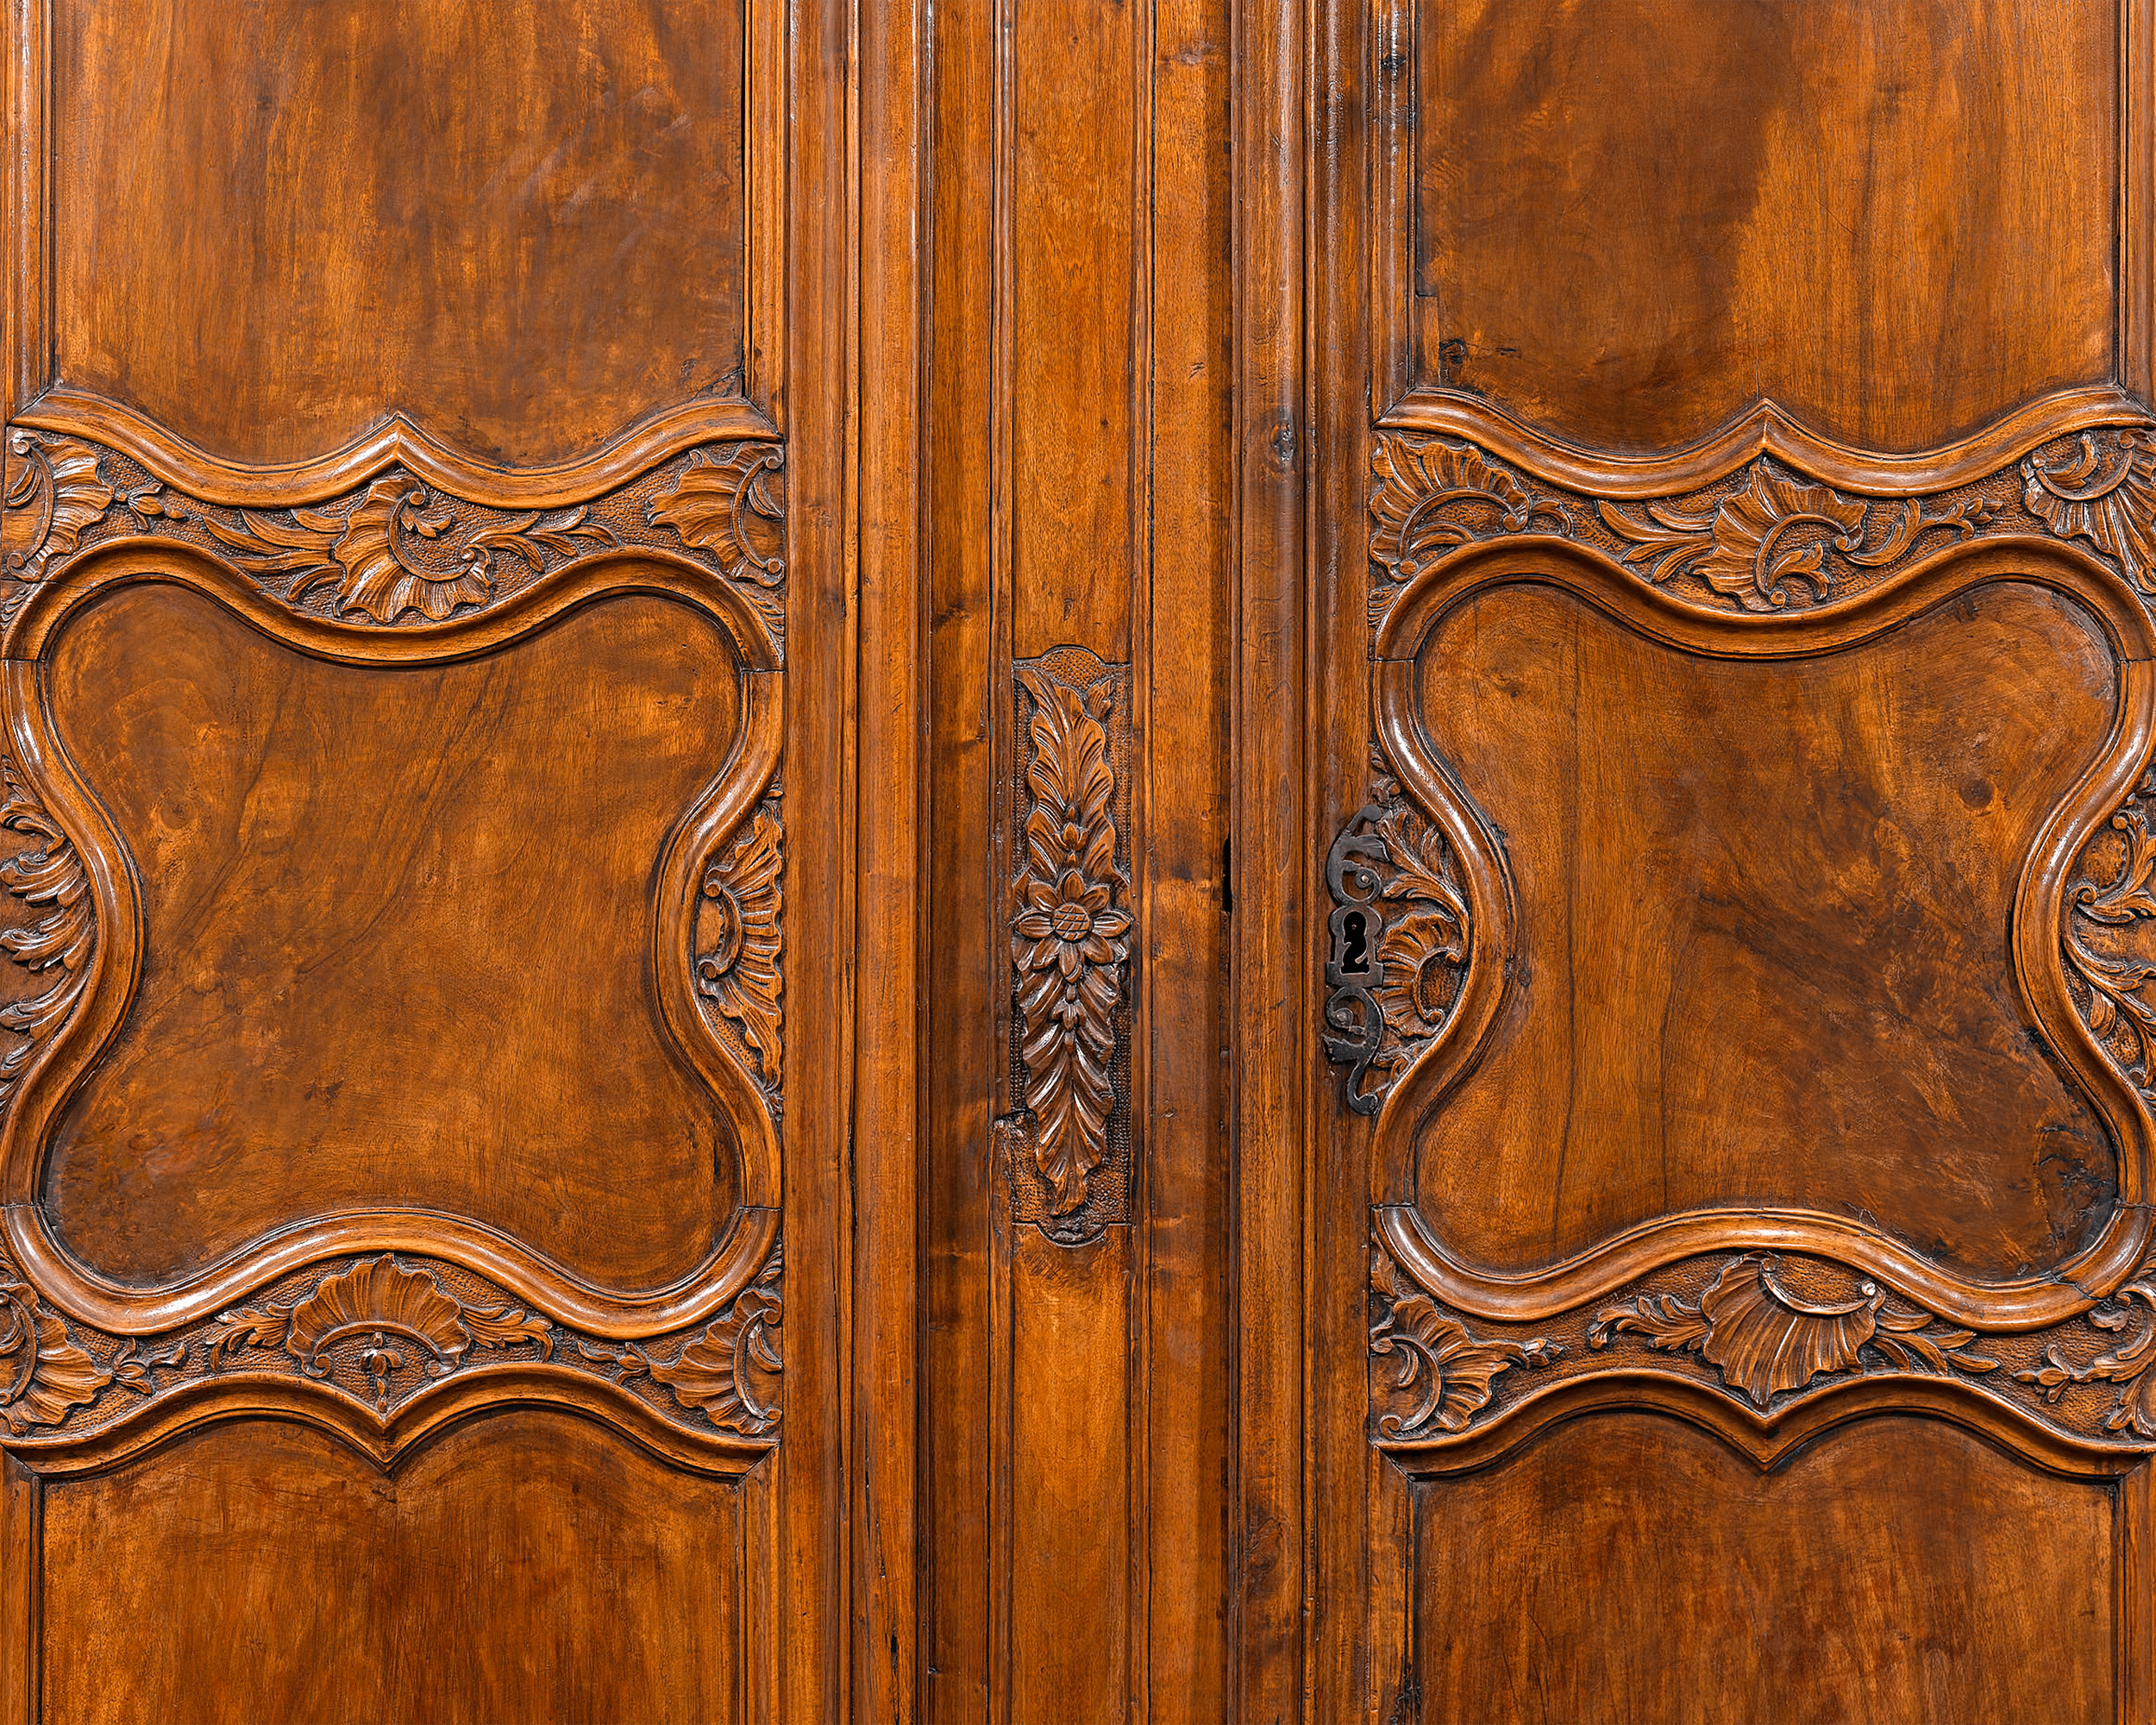 Elegant rocaille carvings distinguish this armoire